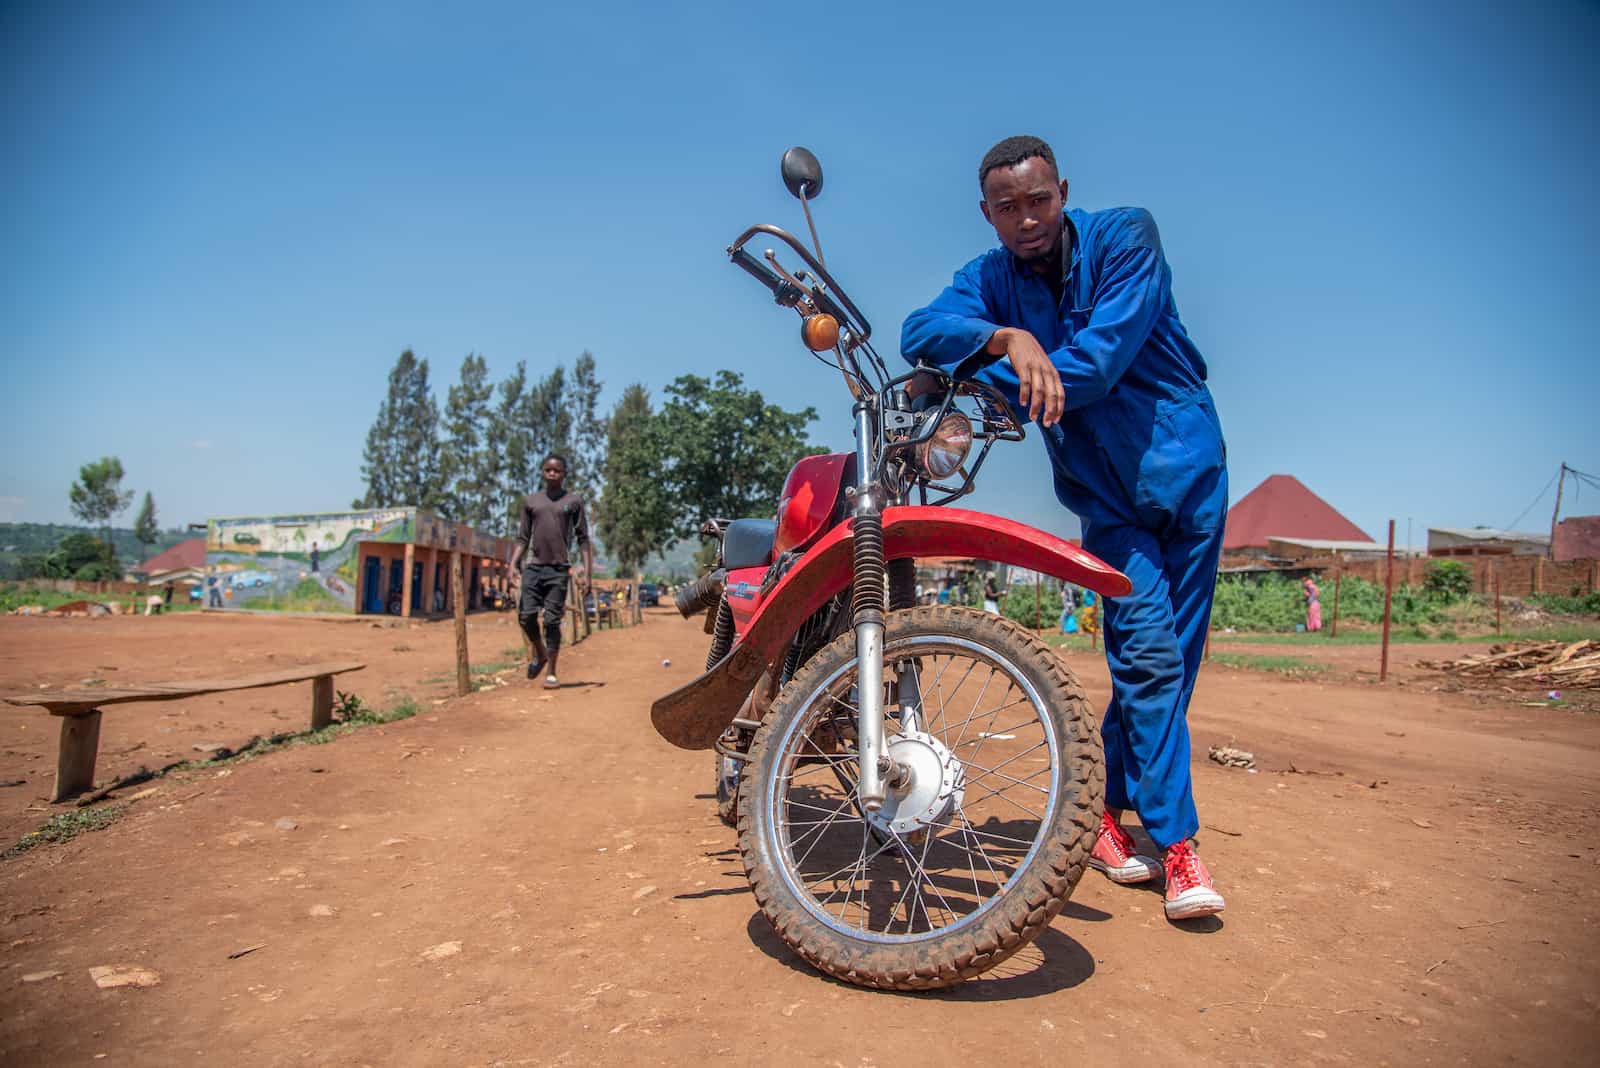 A young man in a blue jumpsuit stands next to a red motorcycle.